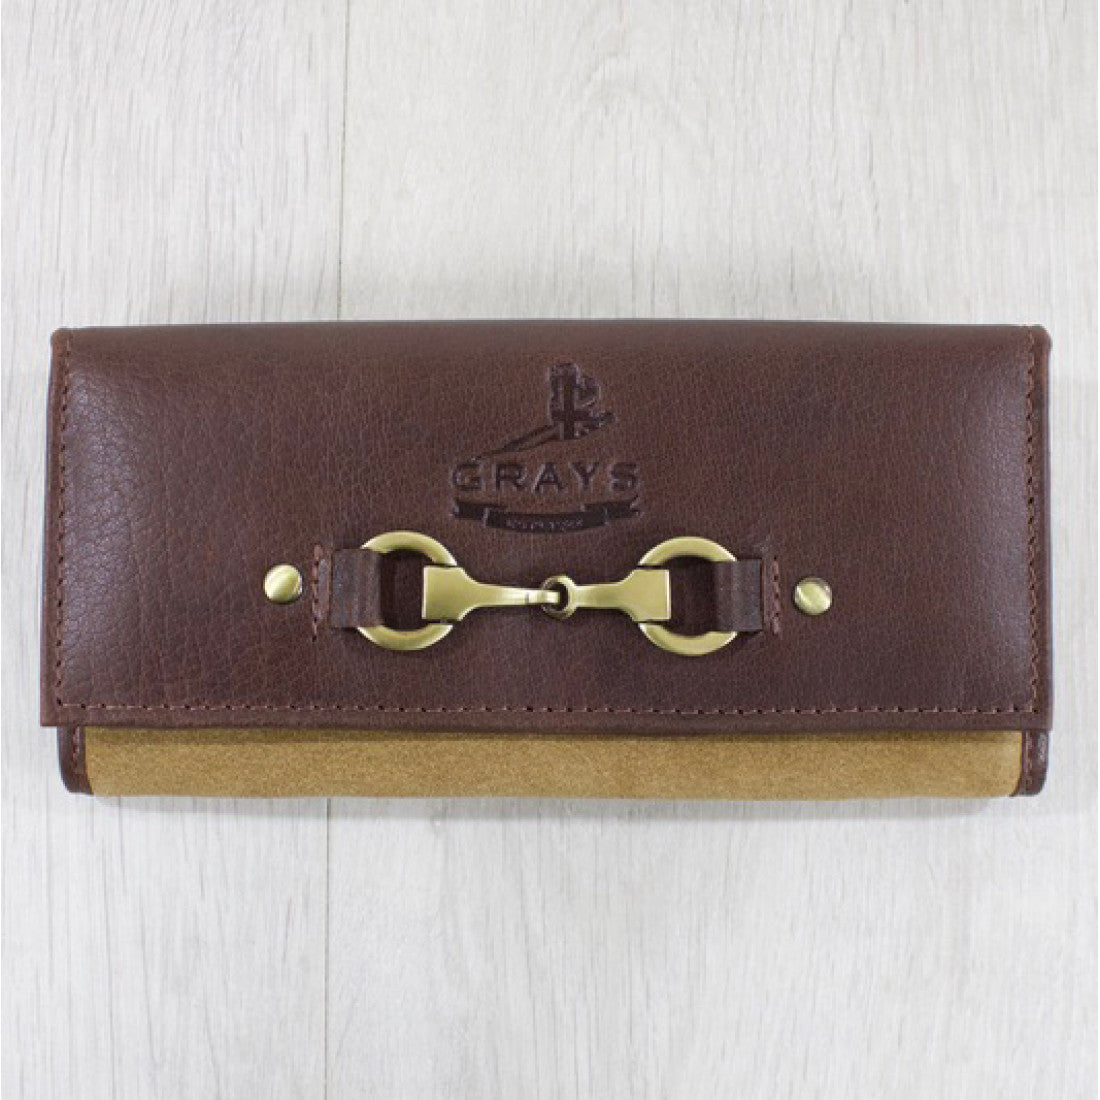 Lily Leather and Suede Purse